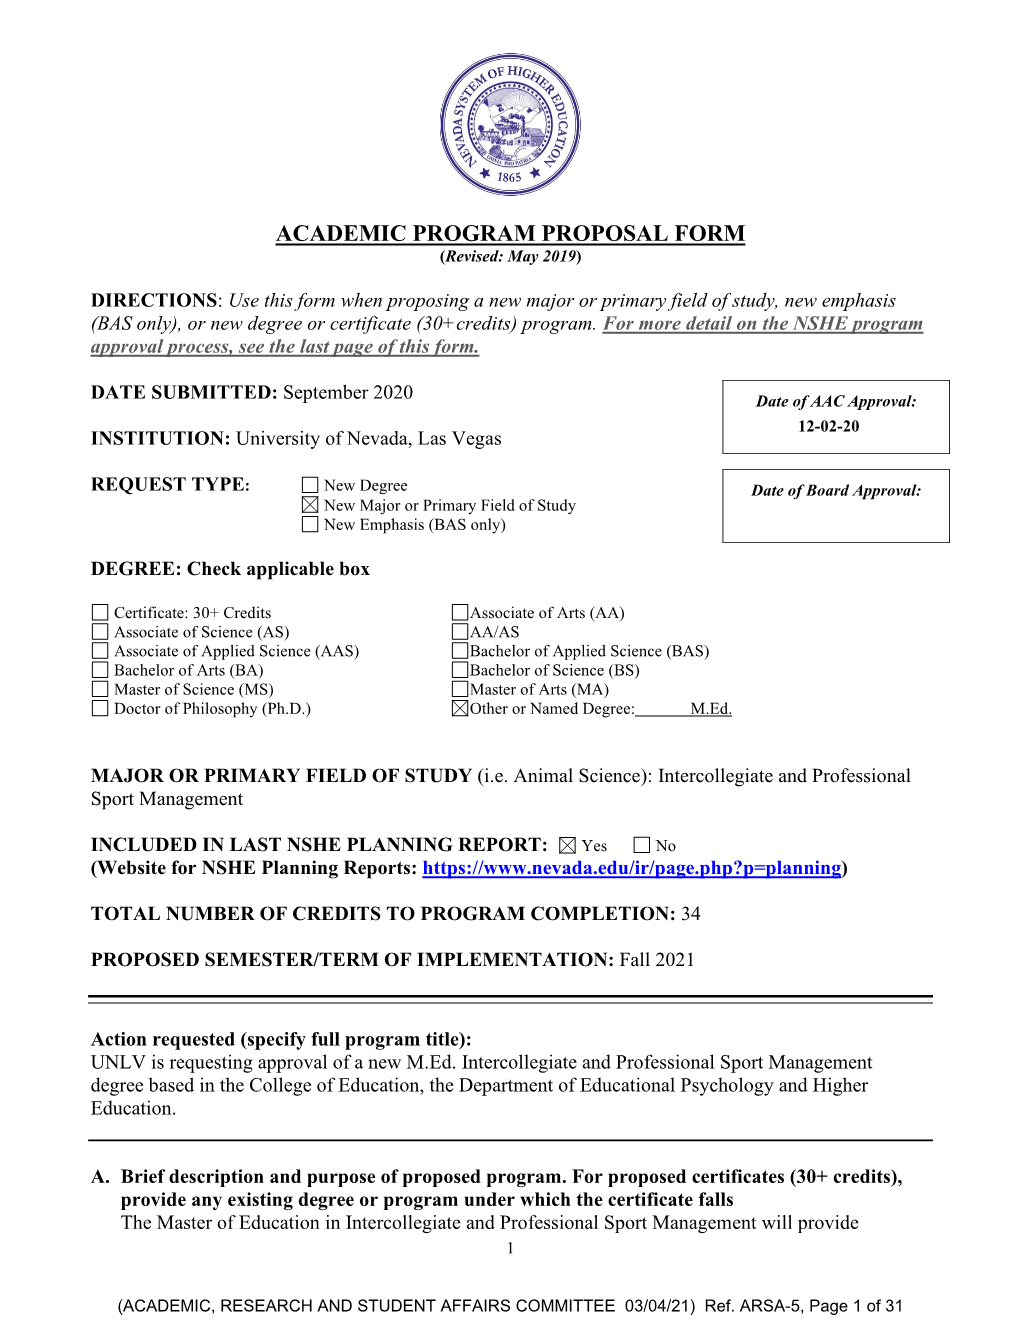 ACADEMIC PROGRAM PROPOSAL FORM (Revised: May 2019)